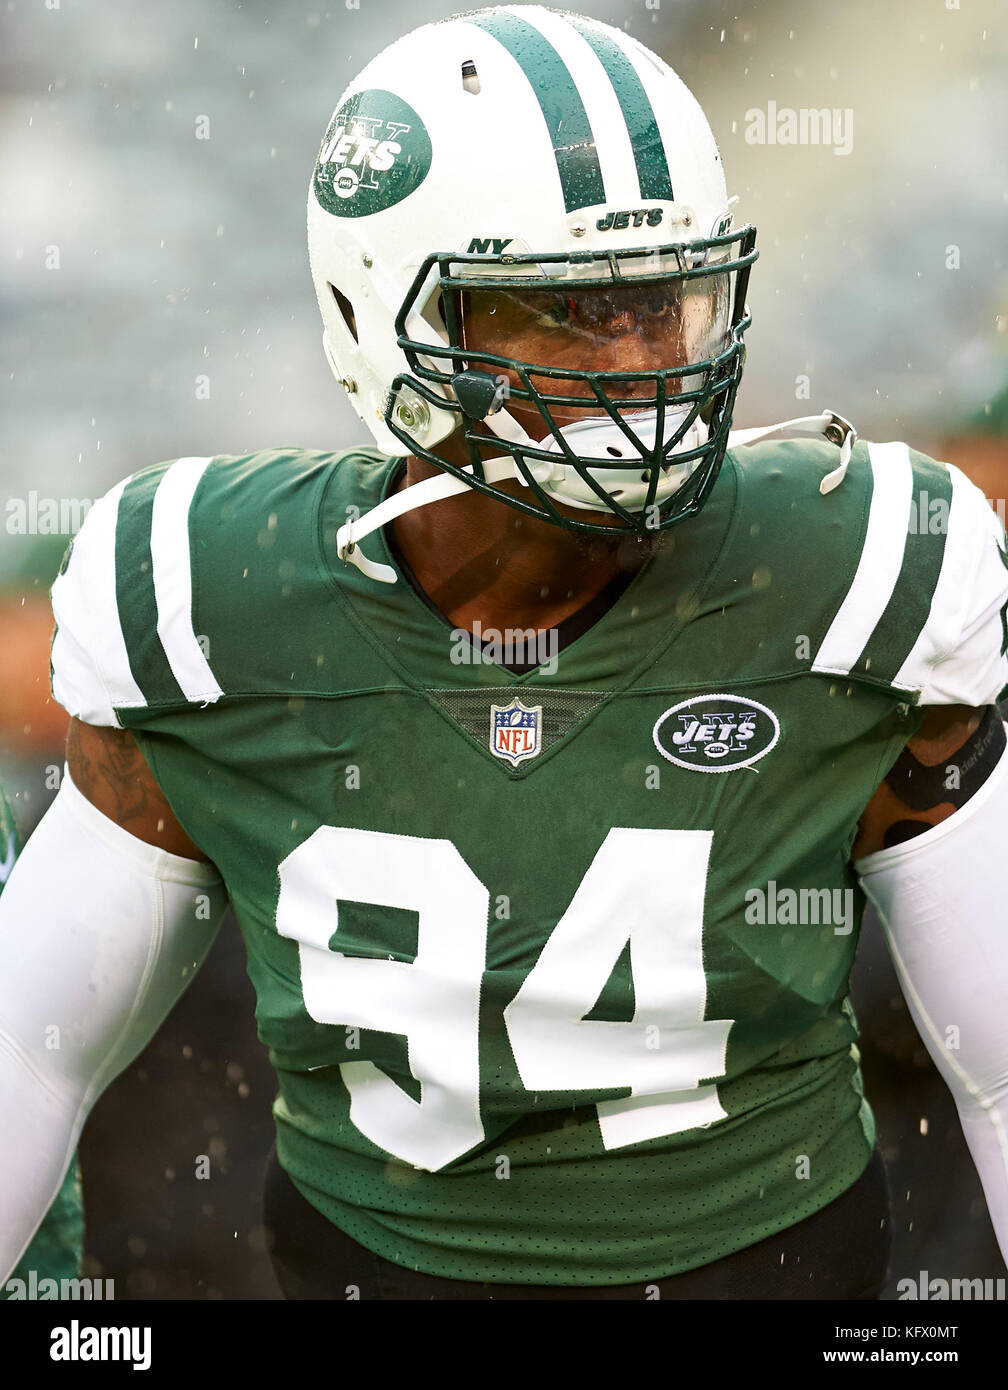 East Rutherford, New Jersey, USA. 1st Nov, 2017. Jets' defensive linemen Kony Ealy (94) during warm ups prior to NFL action between the Atlanta Falcons and the New York Jets at MetLife Stadium in East Rutherford, New Jersey. Duncan Williams/CSM/Alamy Live News Stock Photo